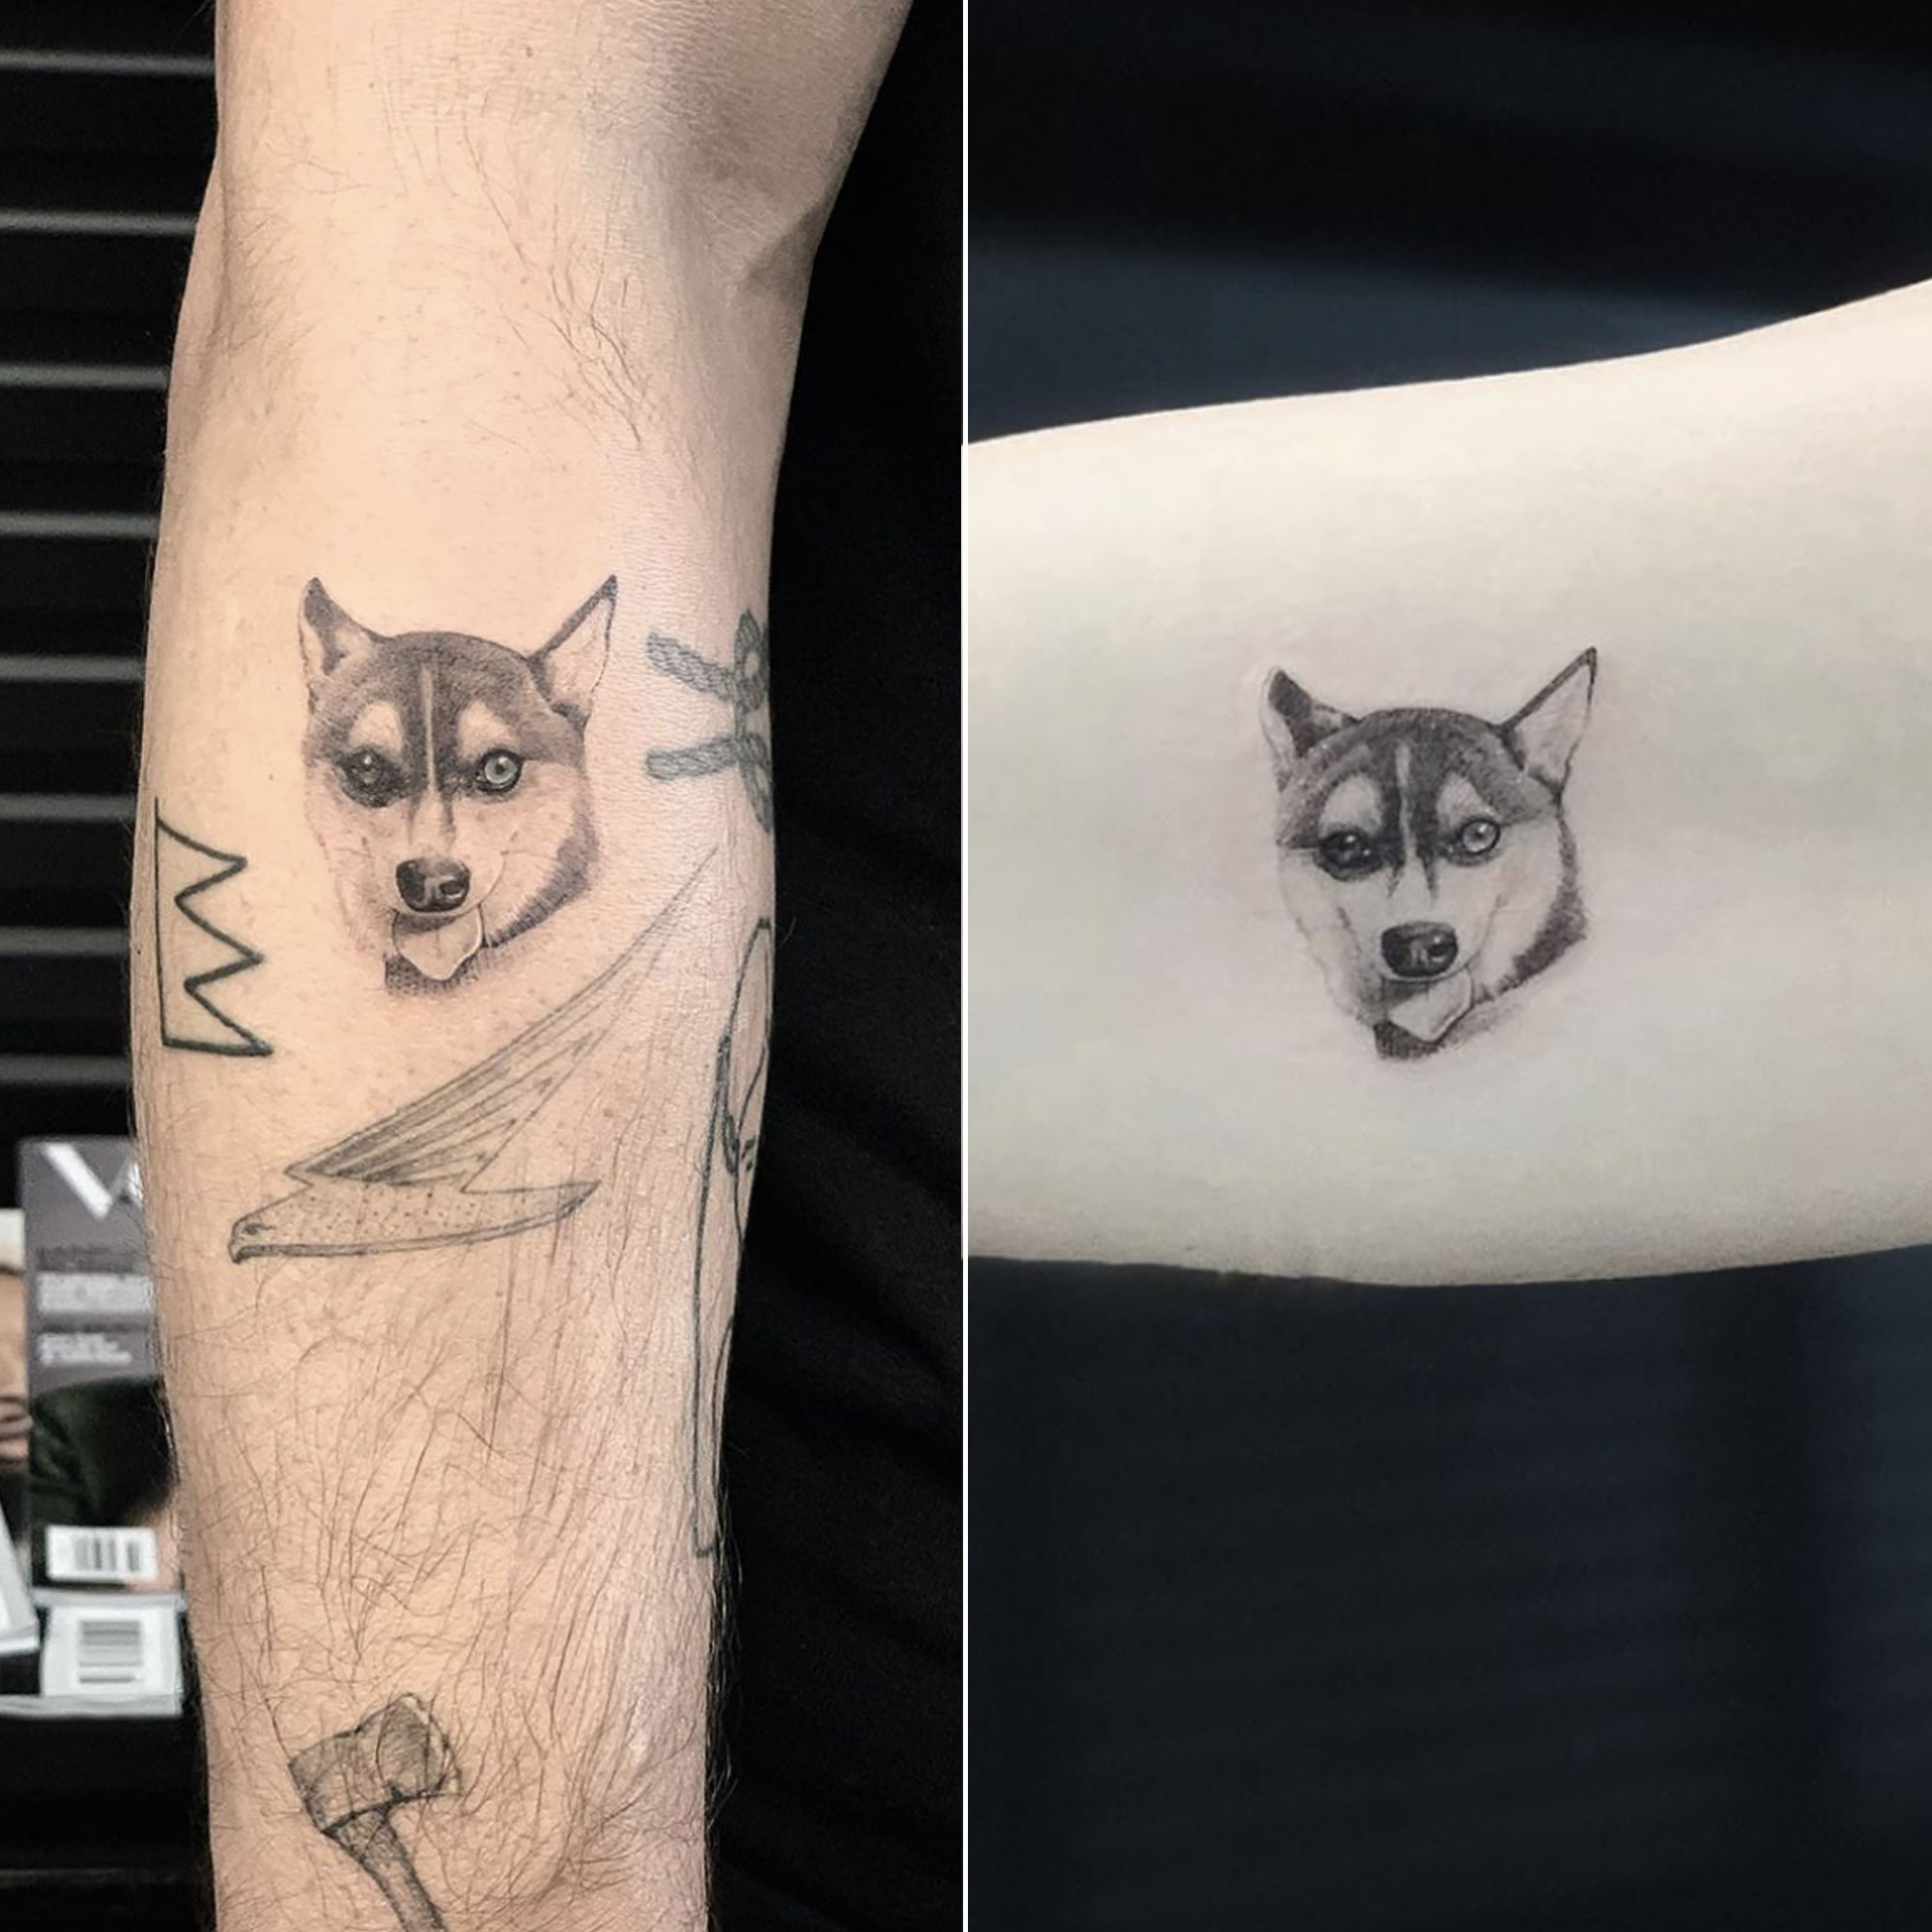 couple tattoo by being animal tattoos by Samarveera2008 on DeviantArt